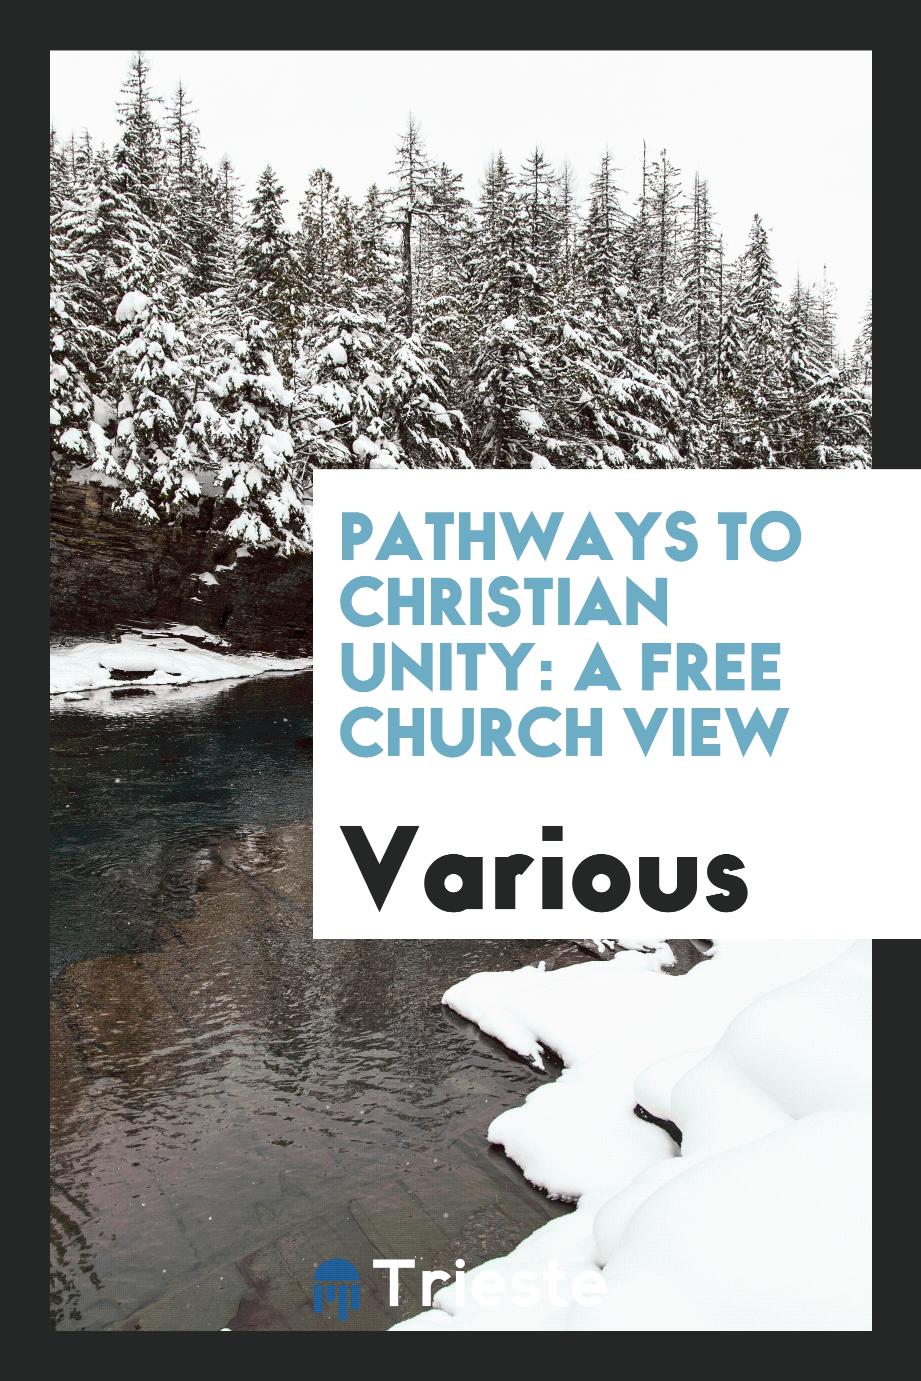 Pathways to Christian unity: a Free Church view